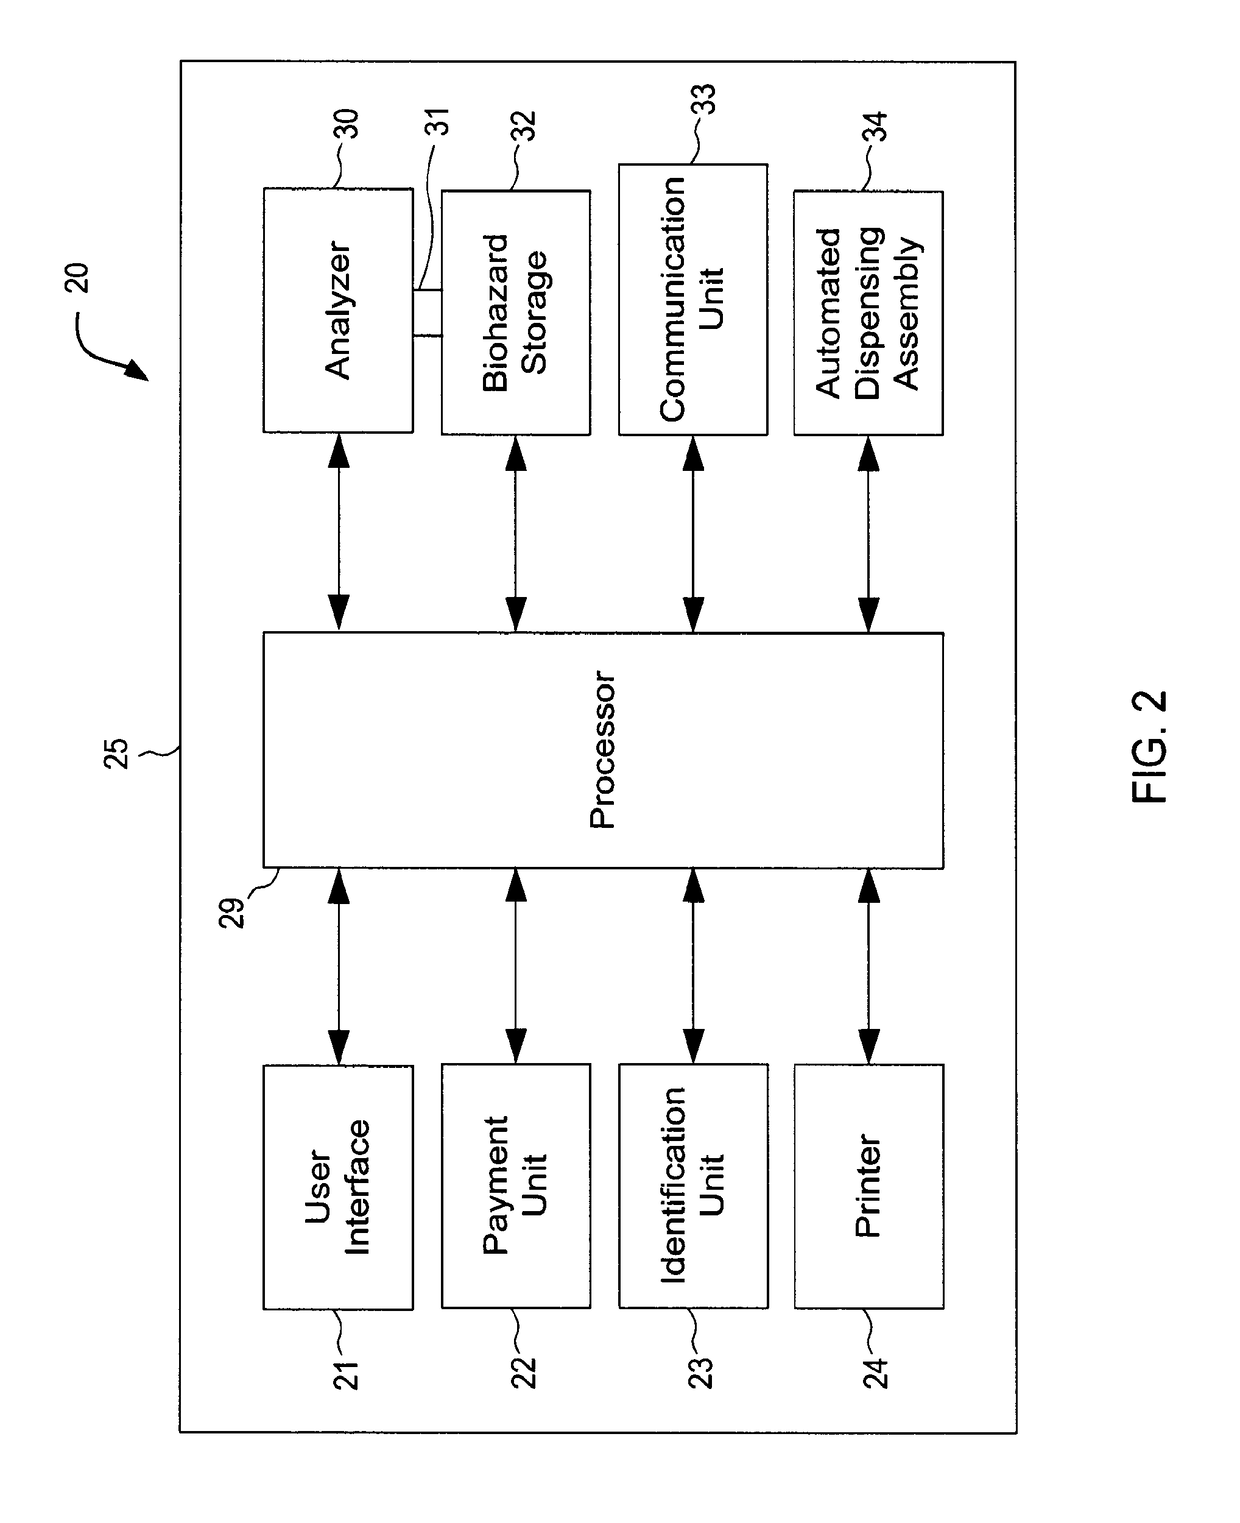 Apparatus and methods for analyzing a medical condition